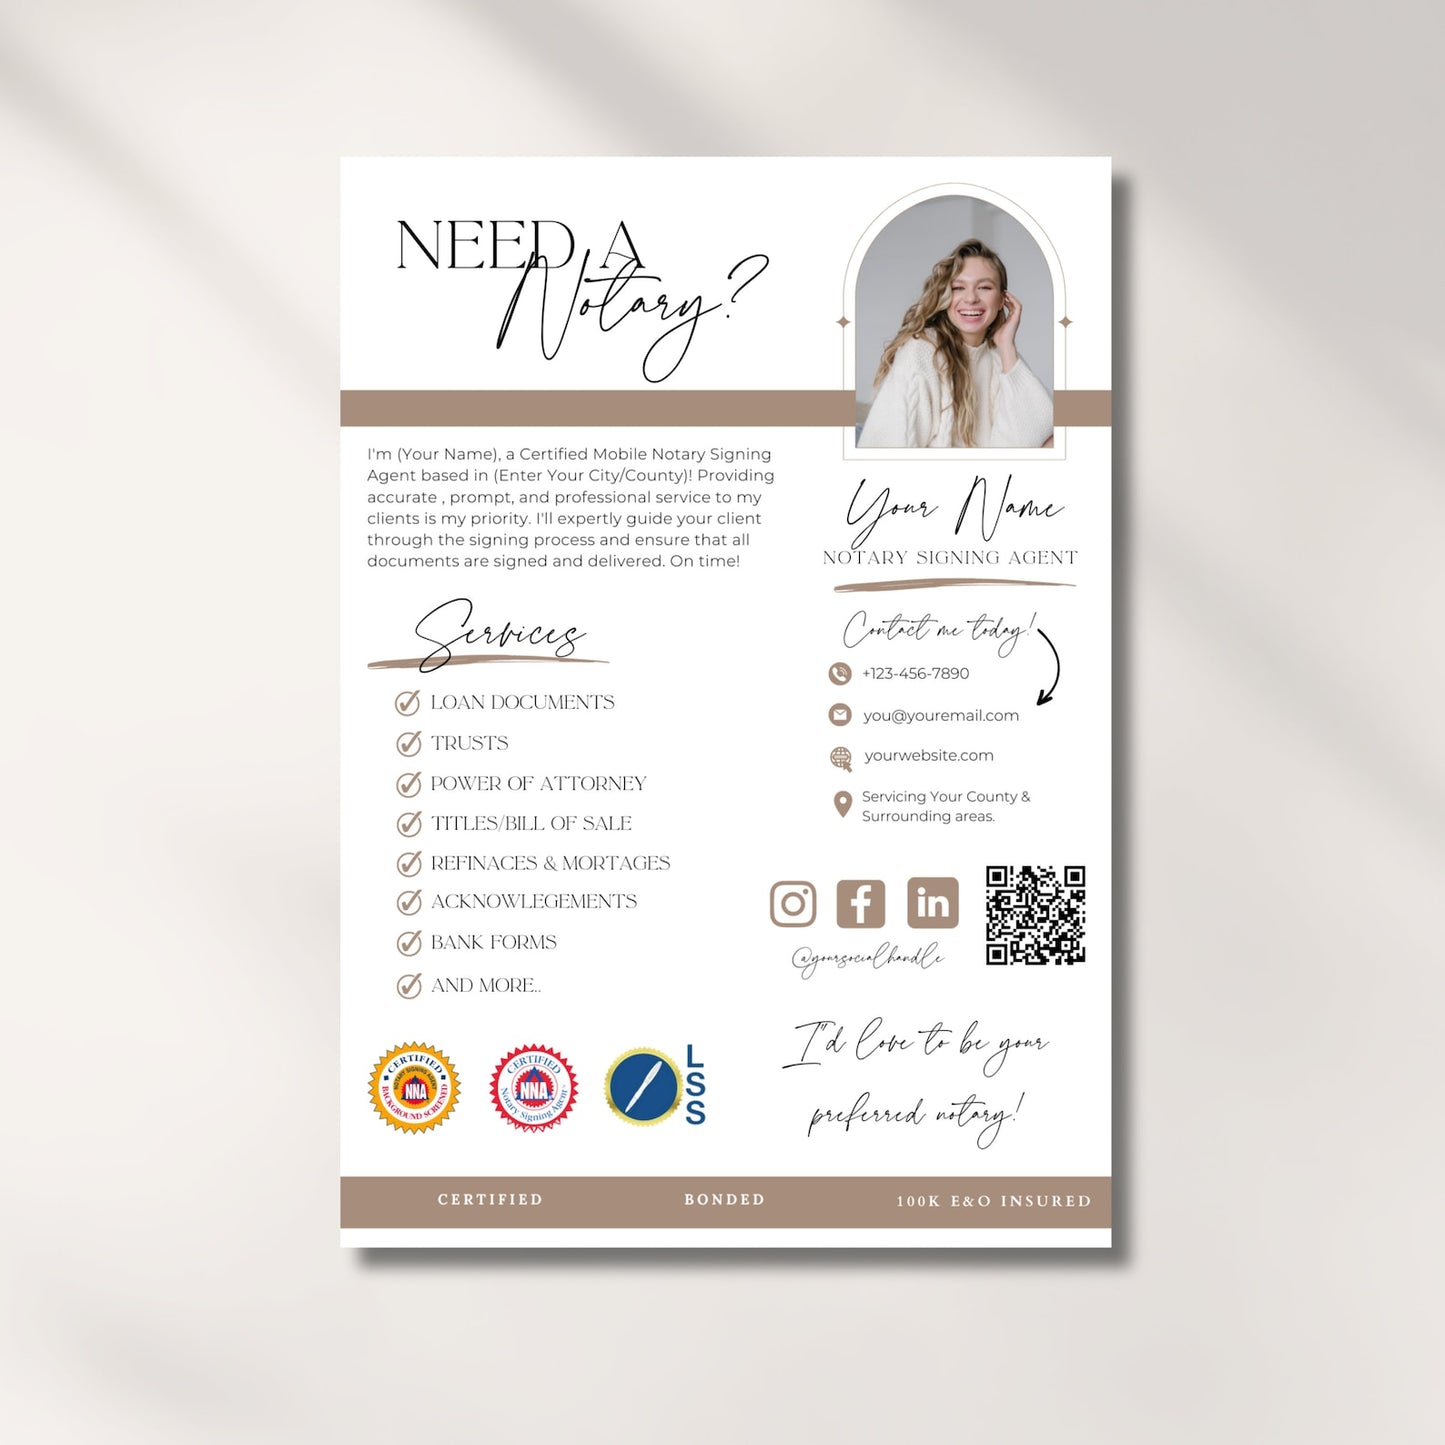 Notary Bundle, Notary Branding Bundle, Notary Flyer Templates, Notary Canva Templates, Notary Marketing Templates, Loan Signing Agent